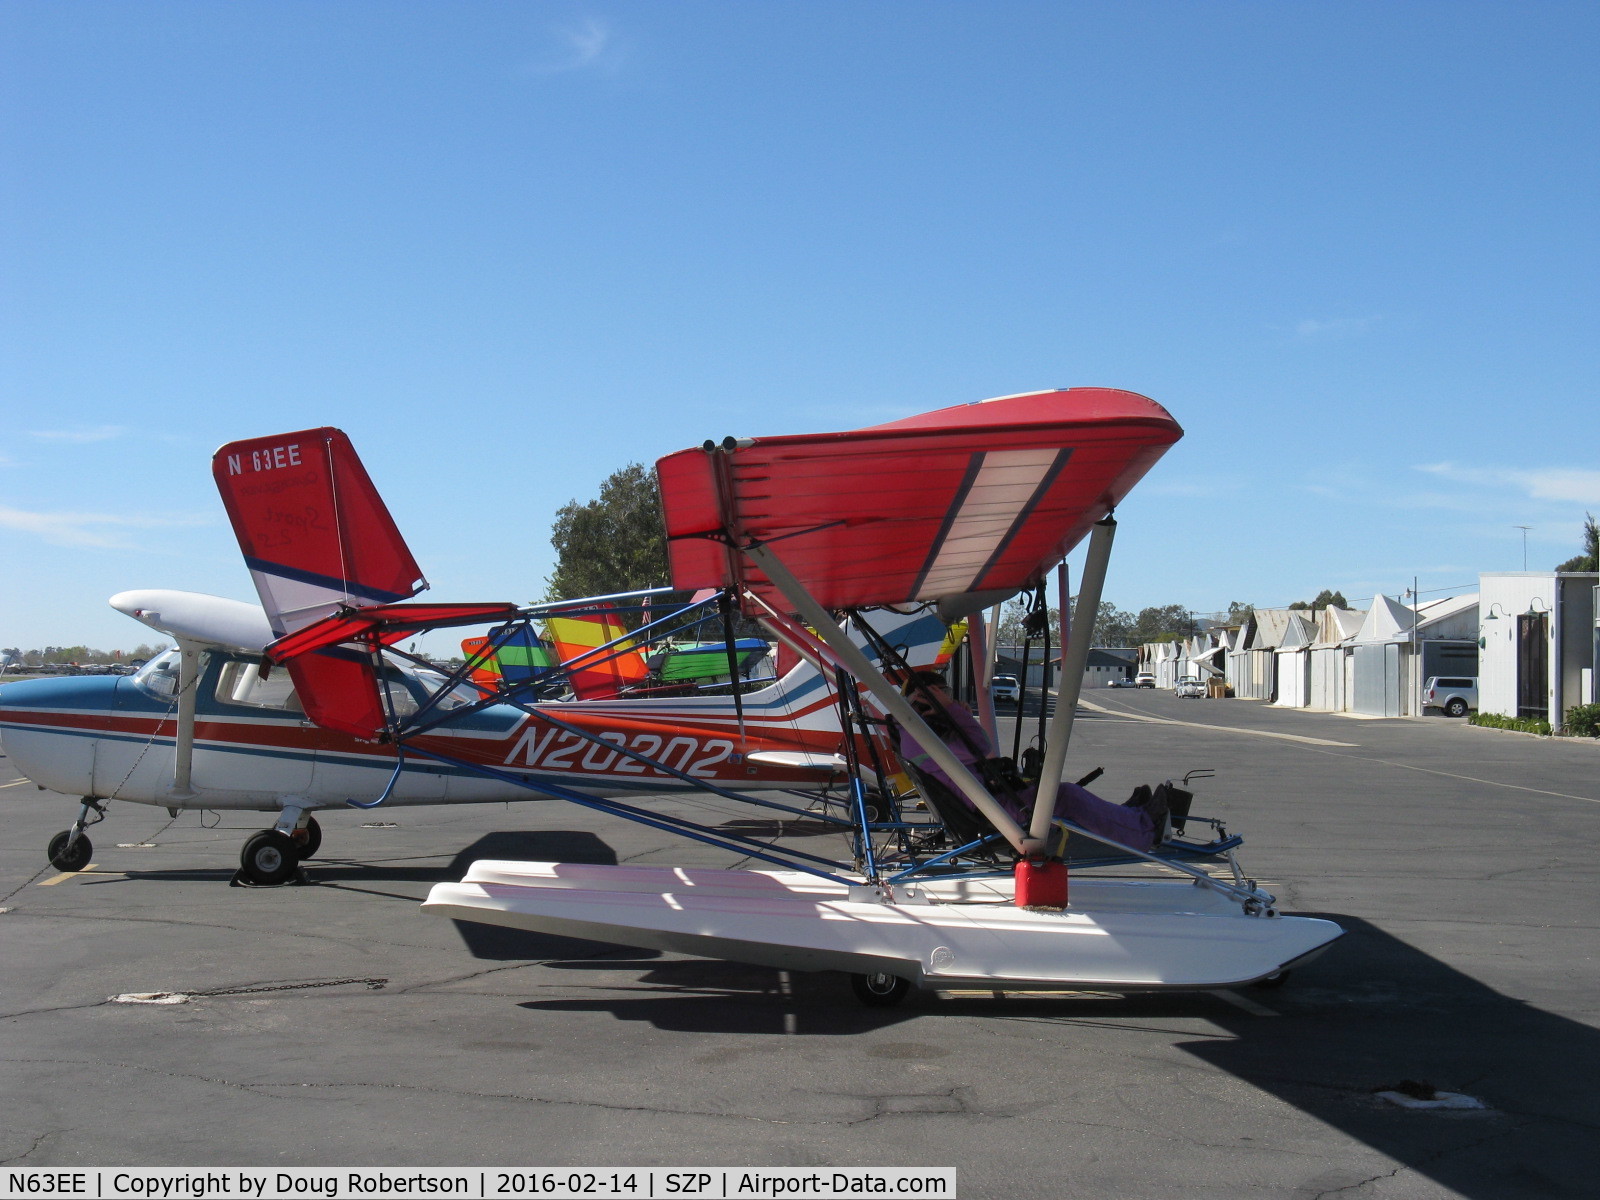 N63EE, Quicksilver Sport 2S C/N 0001, 1999 QUICKSILVER SPORT 2S Amphibian, Rotax 582ULDCDI 2-stroke 65 Hp pusher engine, two carburetors, RARE to see on amphibious floats, on SZP transient ramp